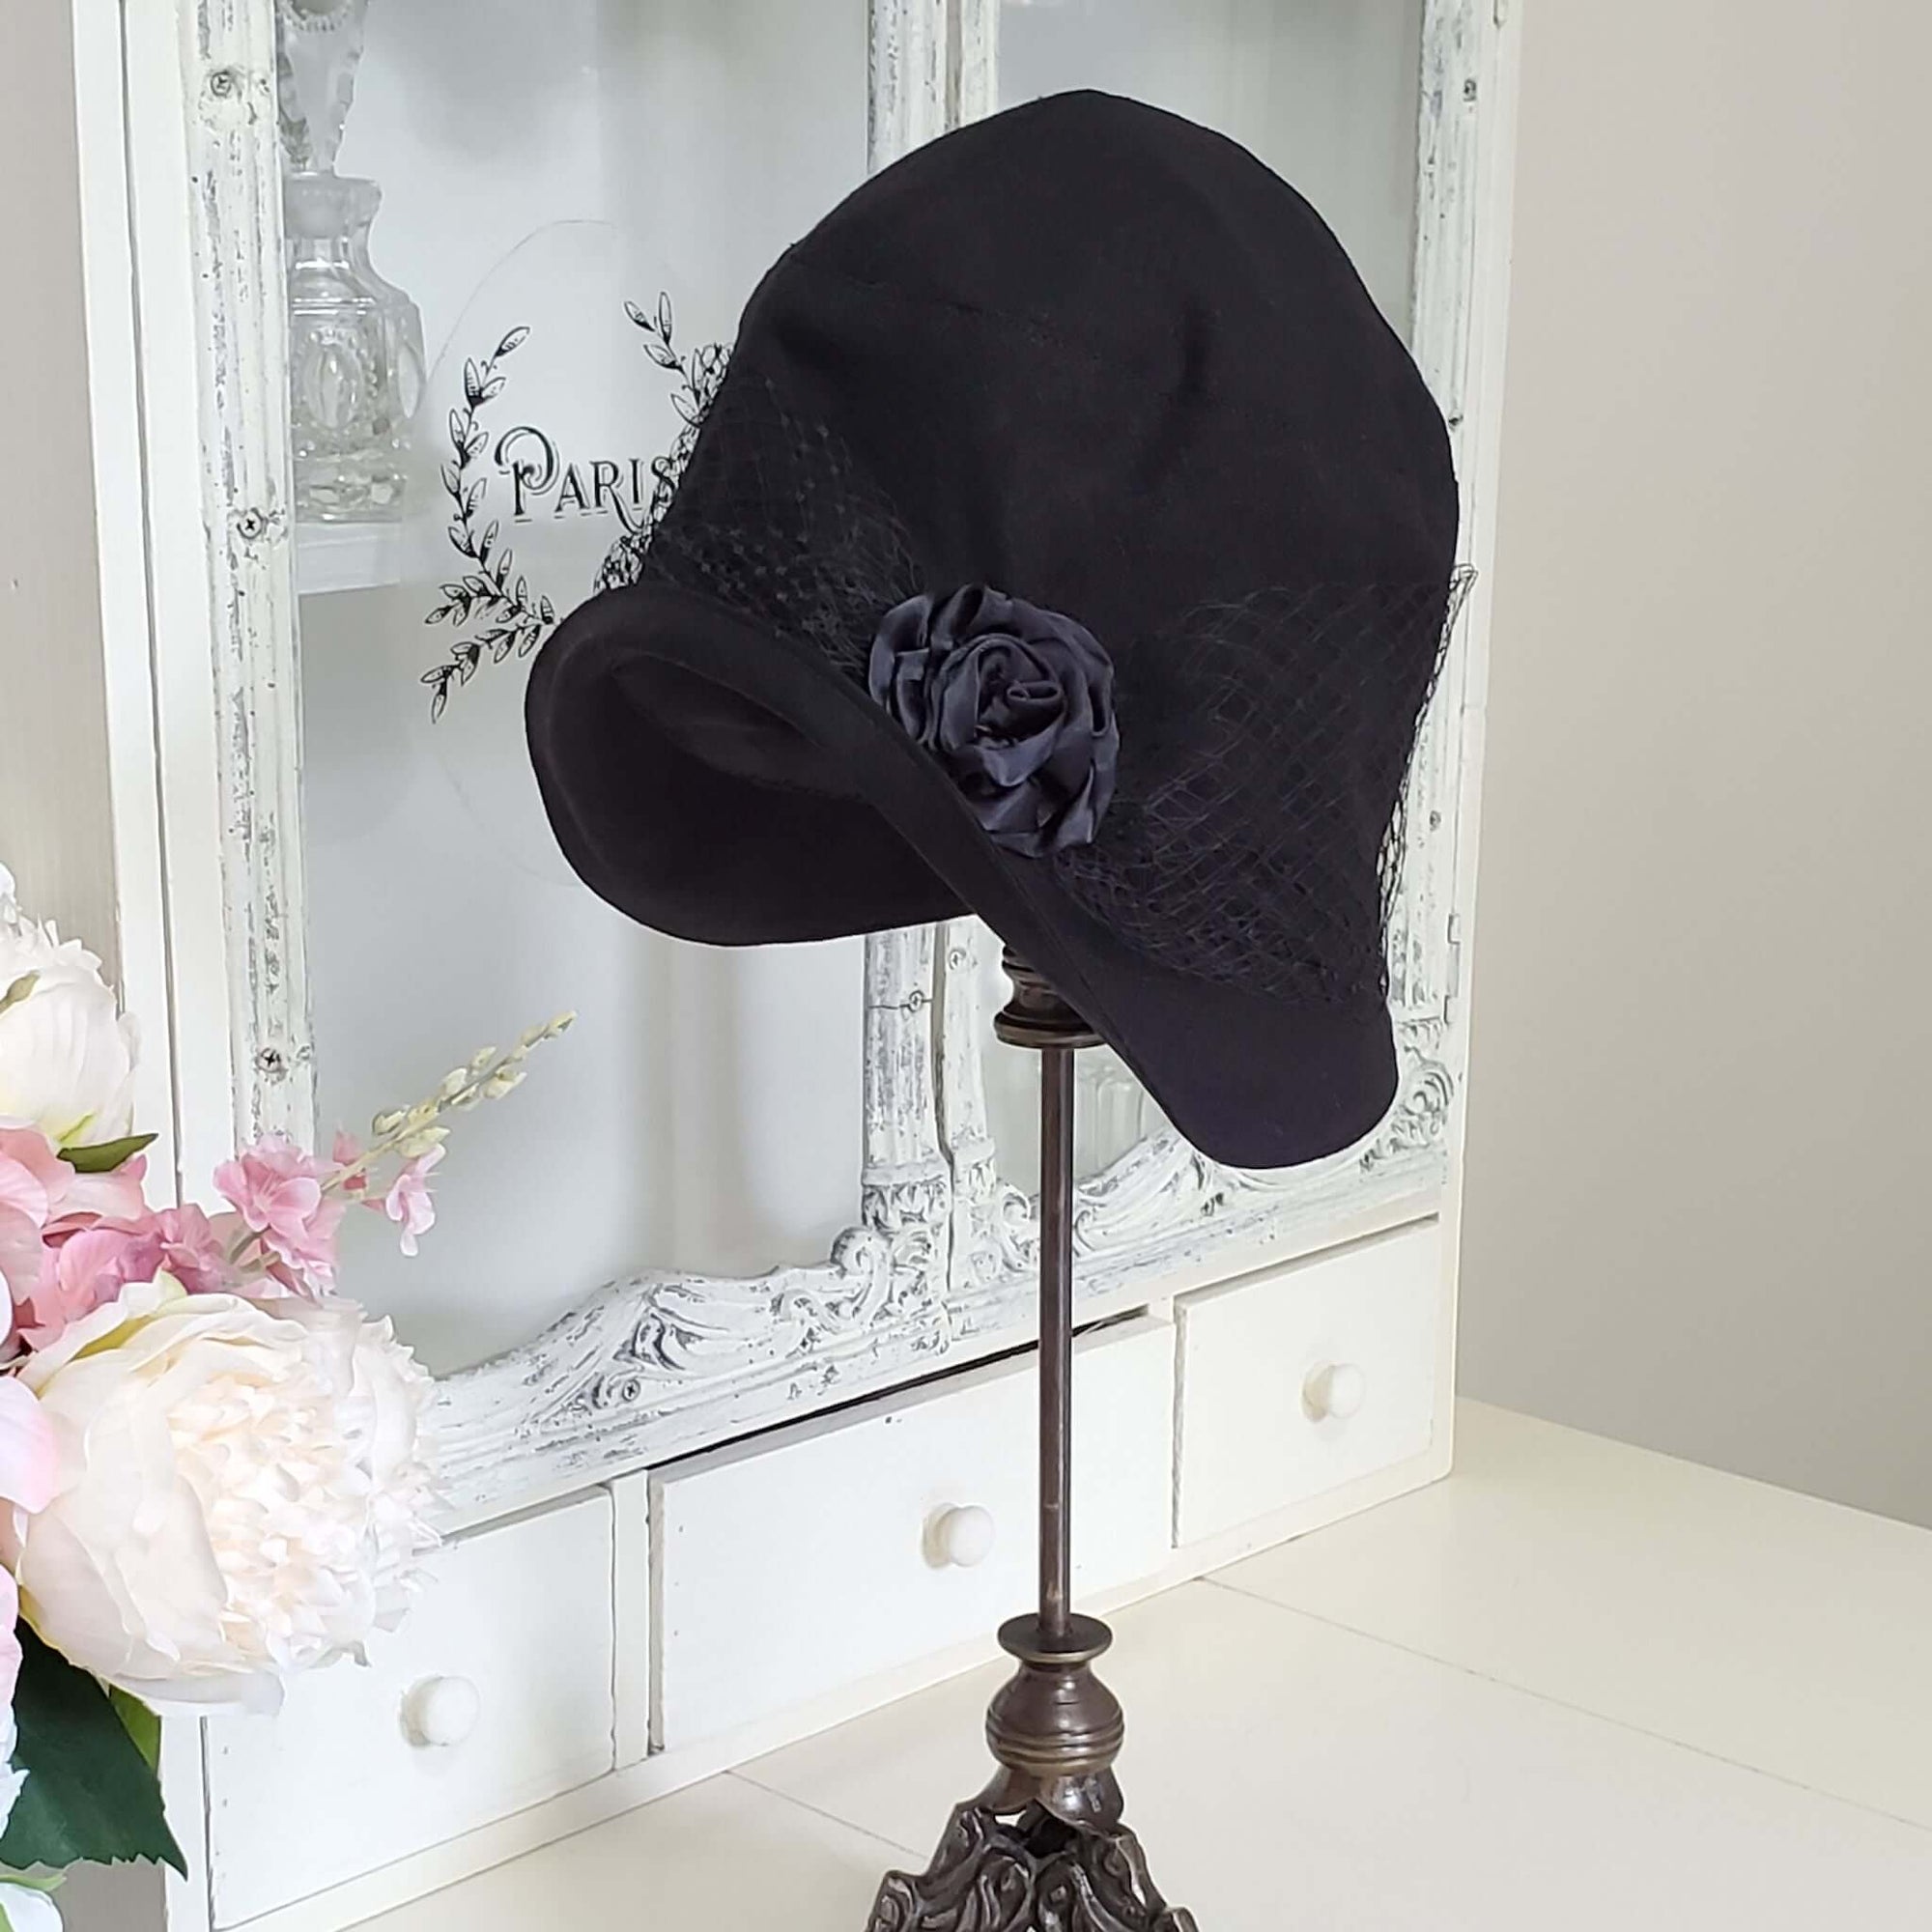 1920s Vintage Style Hat with Veil and Floral Detail